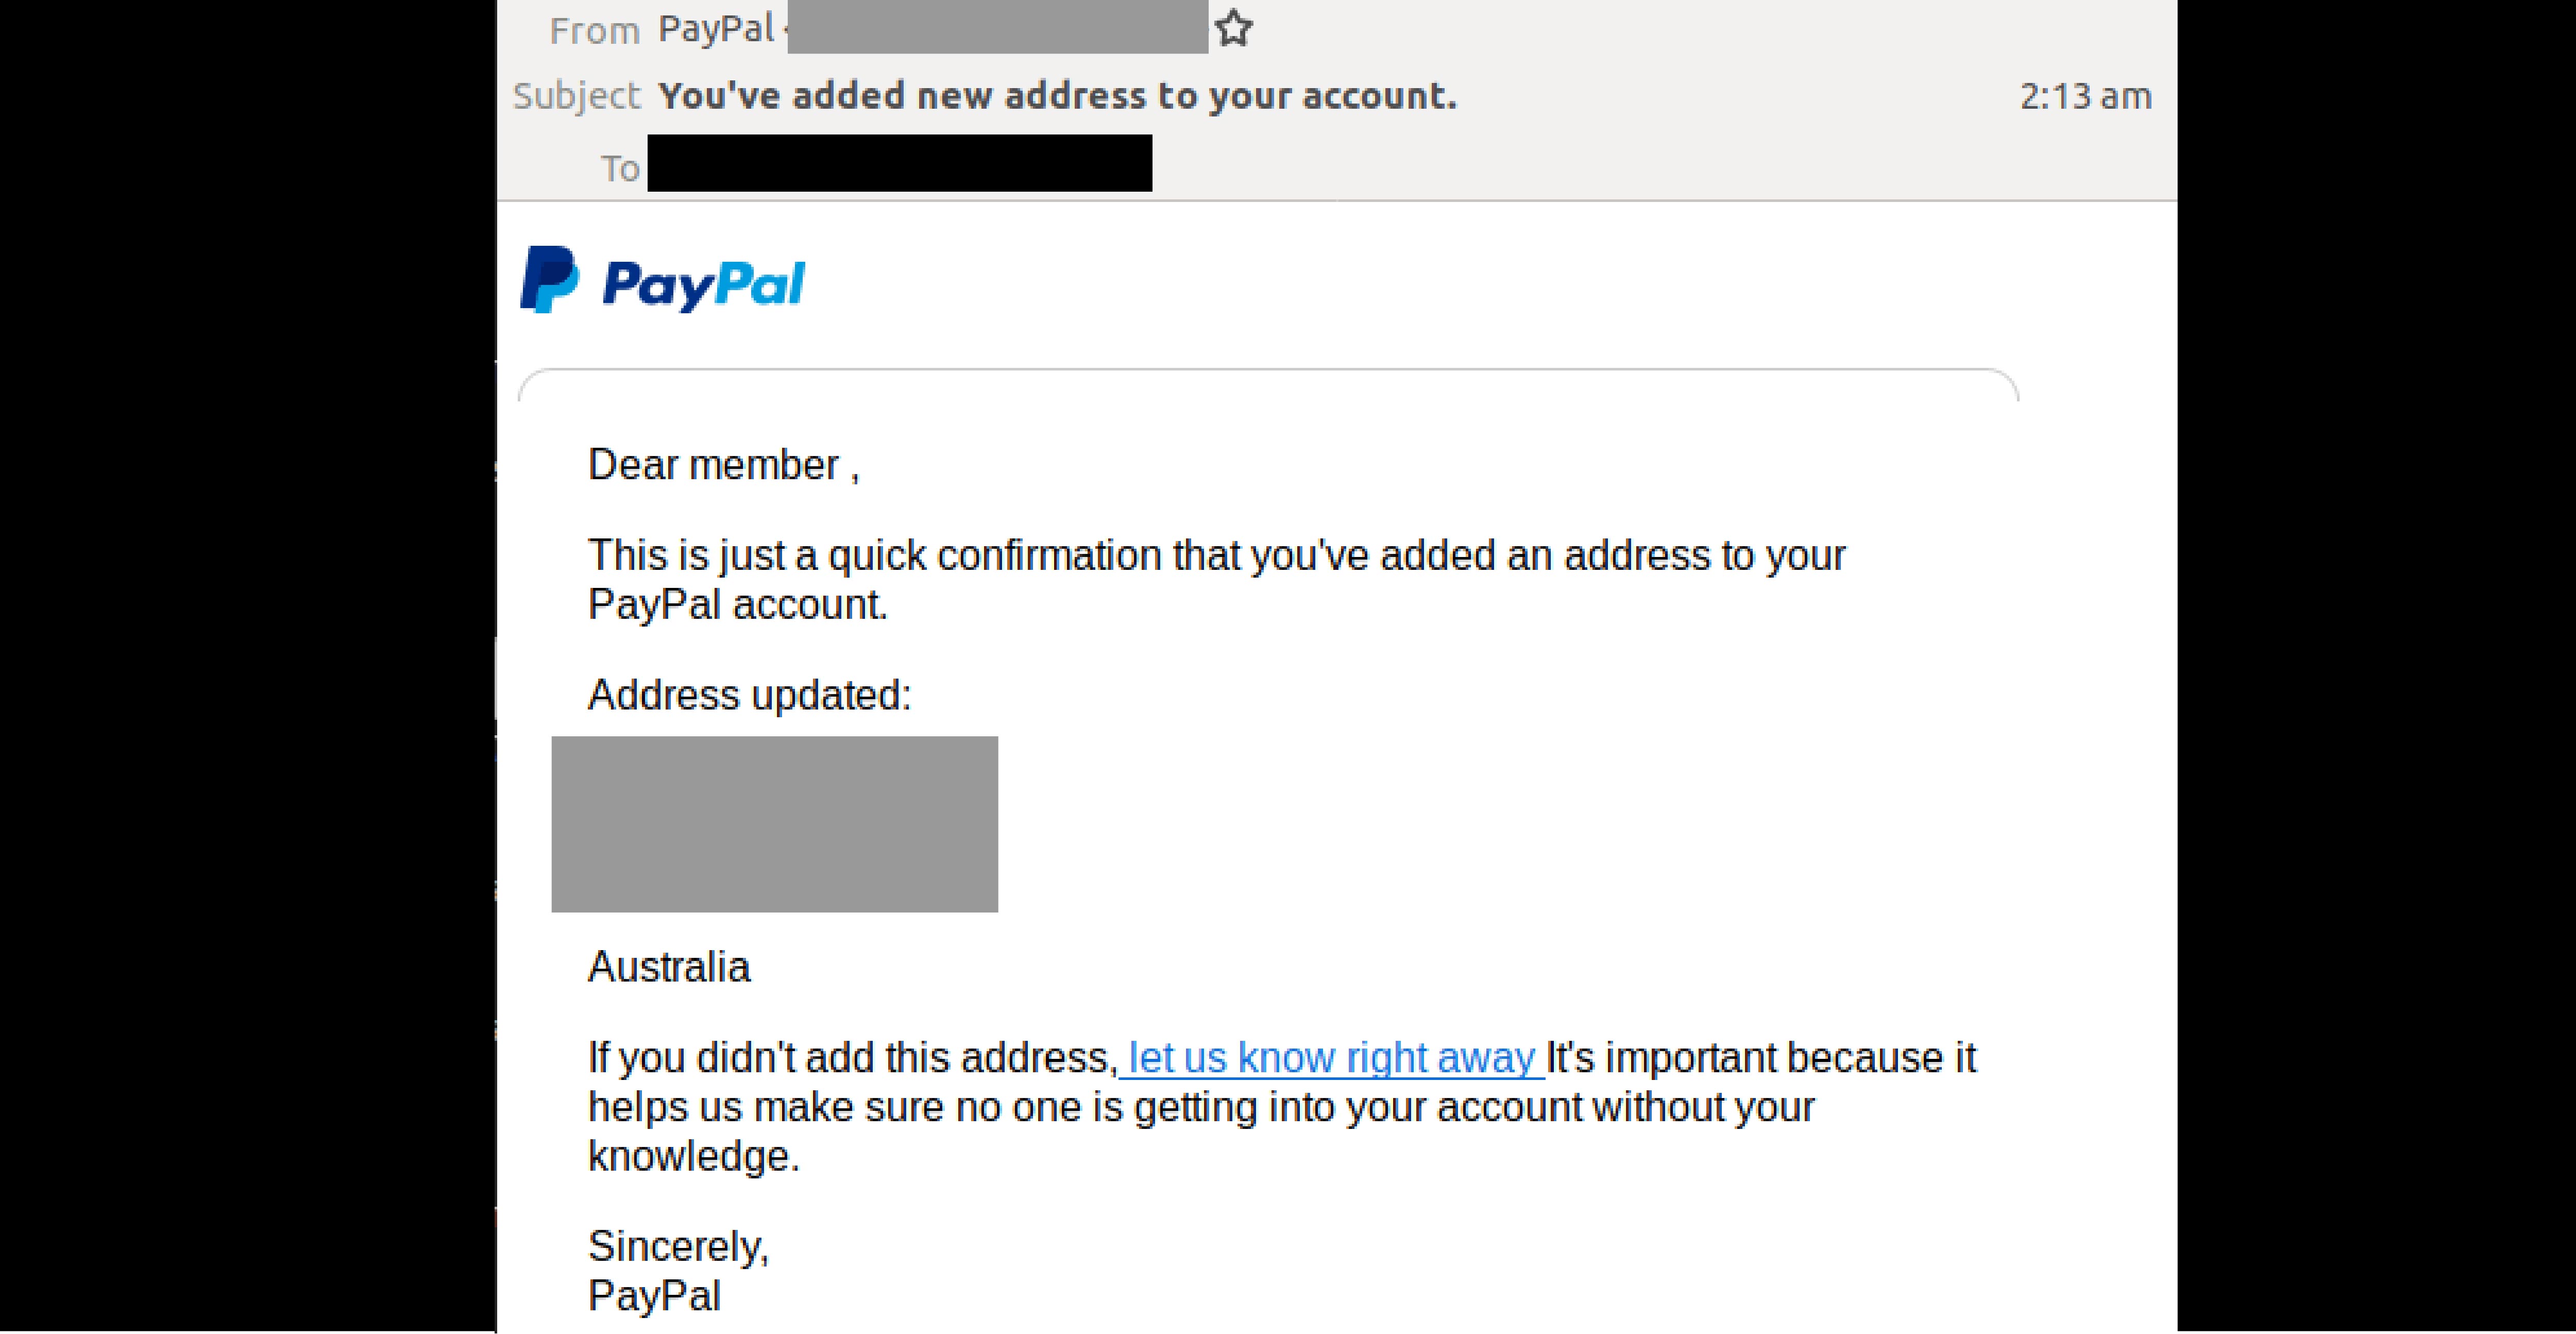 phishing email impersonating paypal confirms the addition of